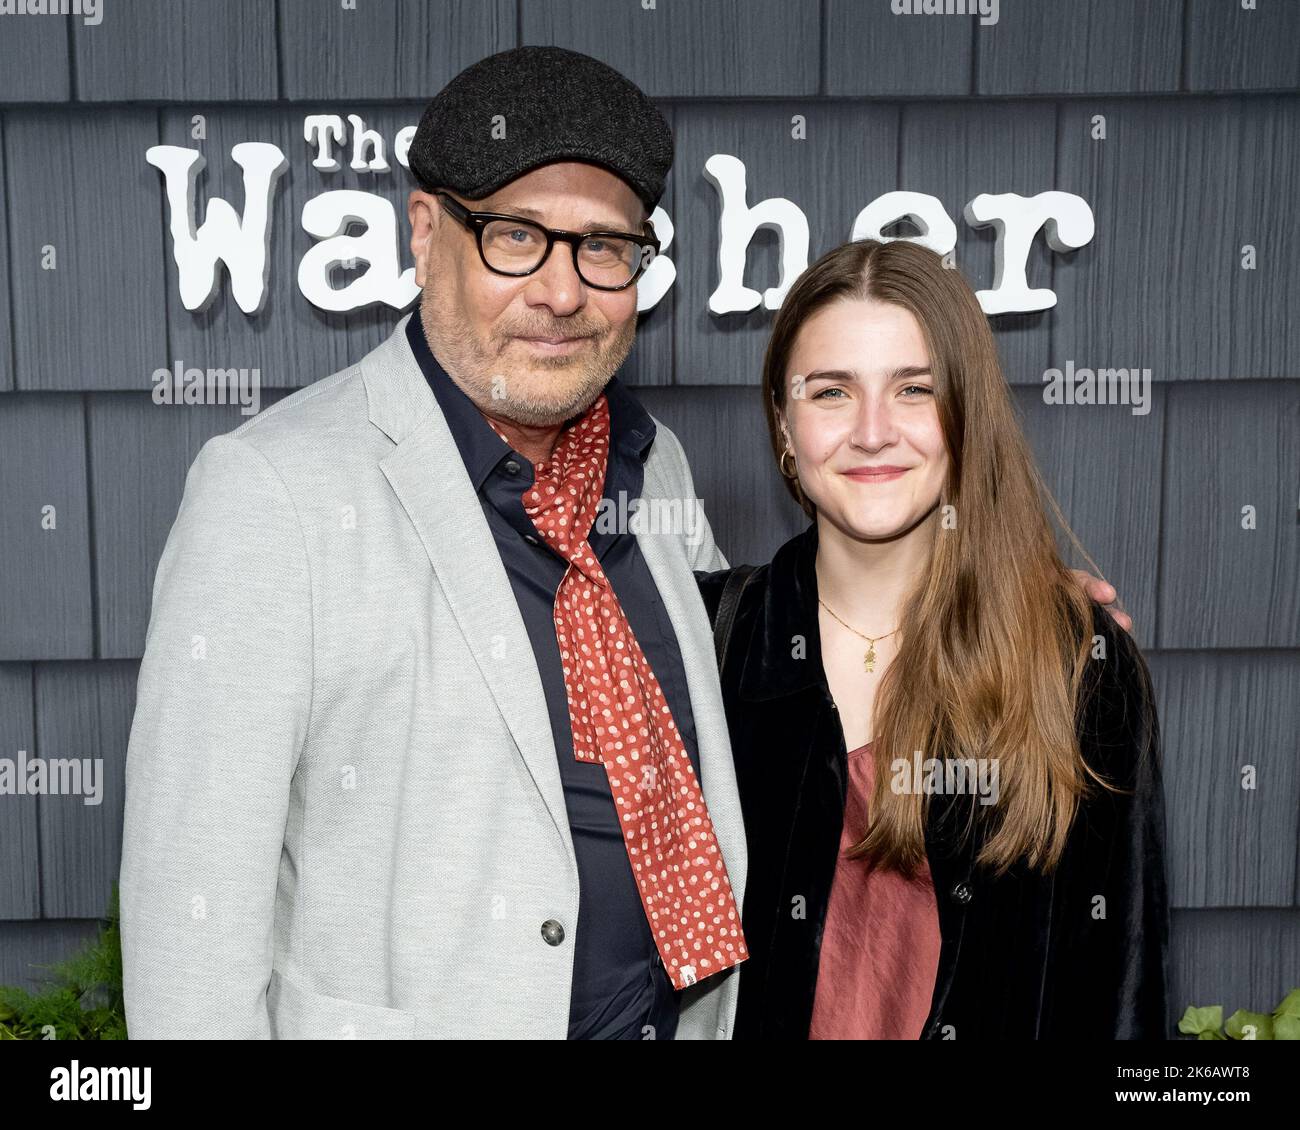 New York, USA. 12th Oct, 2022. Terry Kinney and Maeve Kinney attend the world premiere of “The Watcher” at The Paris Theater in New York, New York, on Oct. 12, 2022. (Photo by Gabriele Holtermann/Sipa USA) Credit: Sipa USA/Alamy Live News Stock Photo